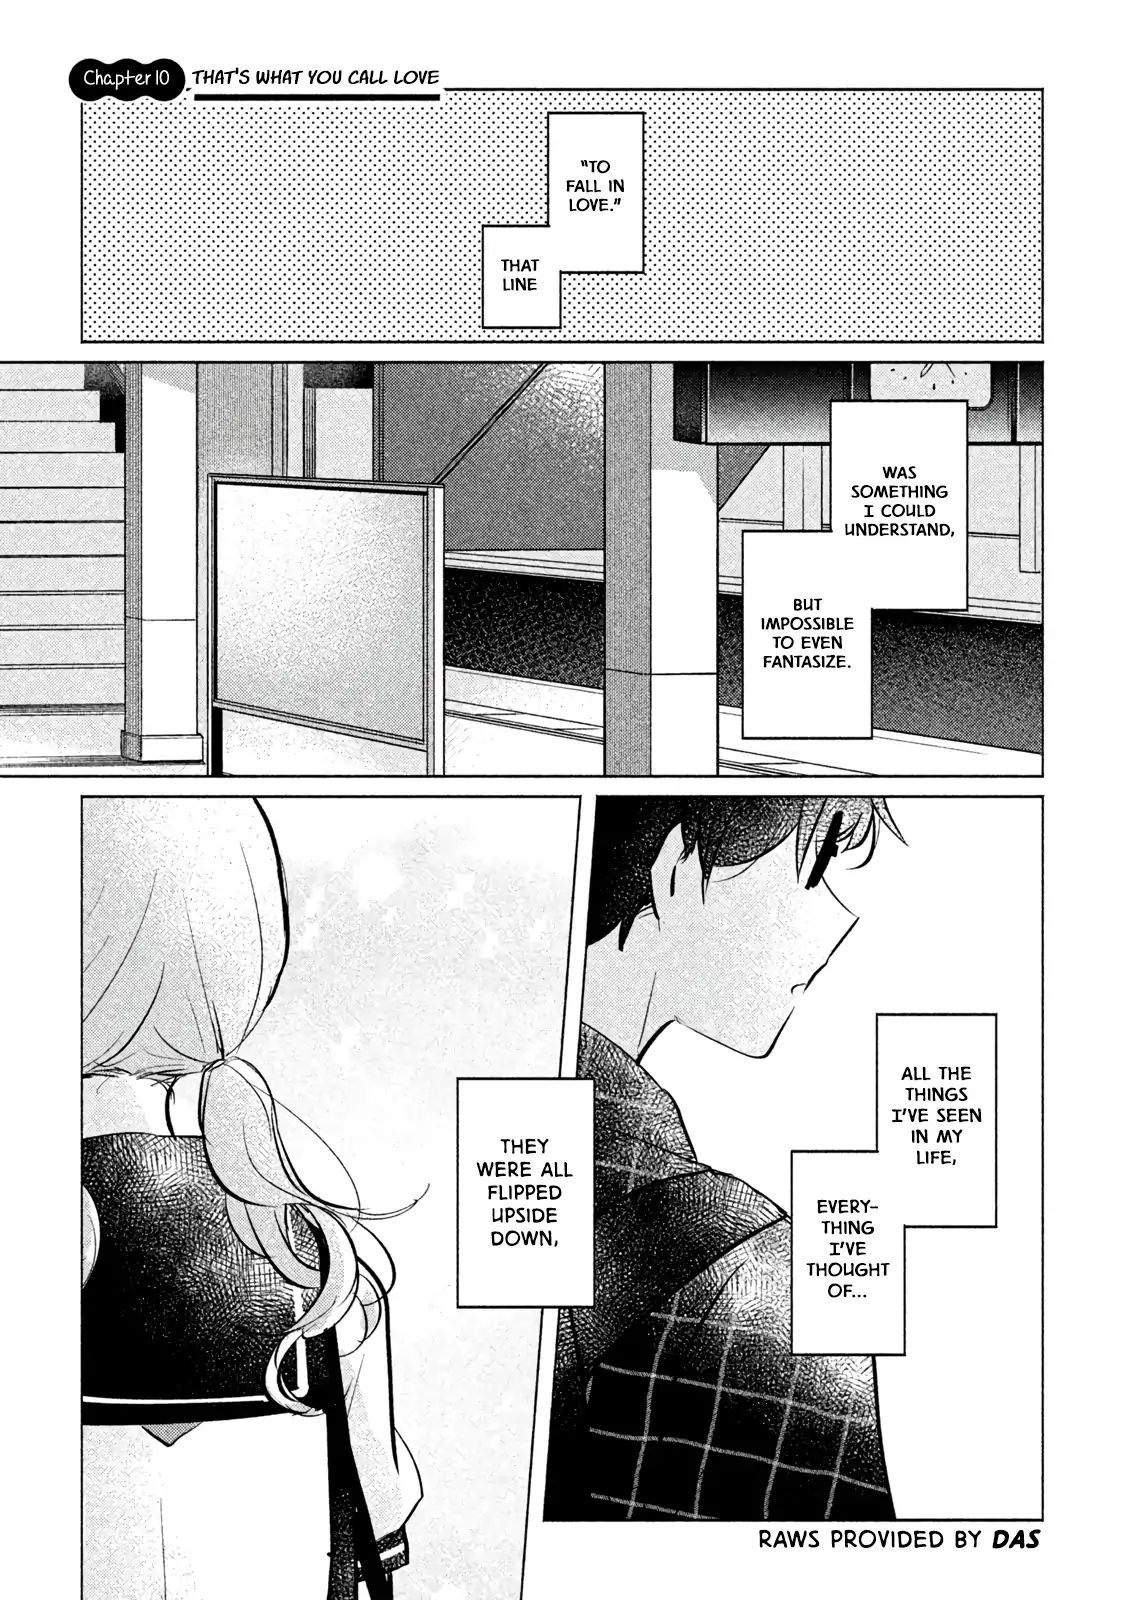 It's Not Meguro-San's First Time Vol.1 Chapter 10: That's What You Call Love - Picture 1